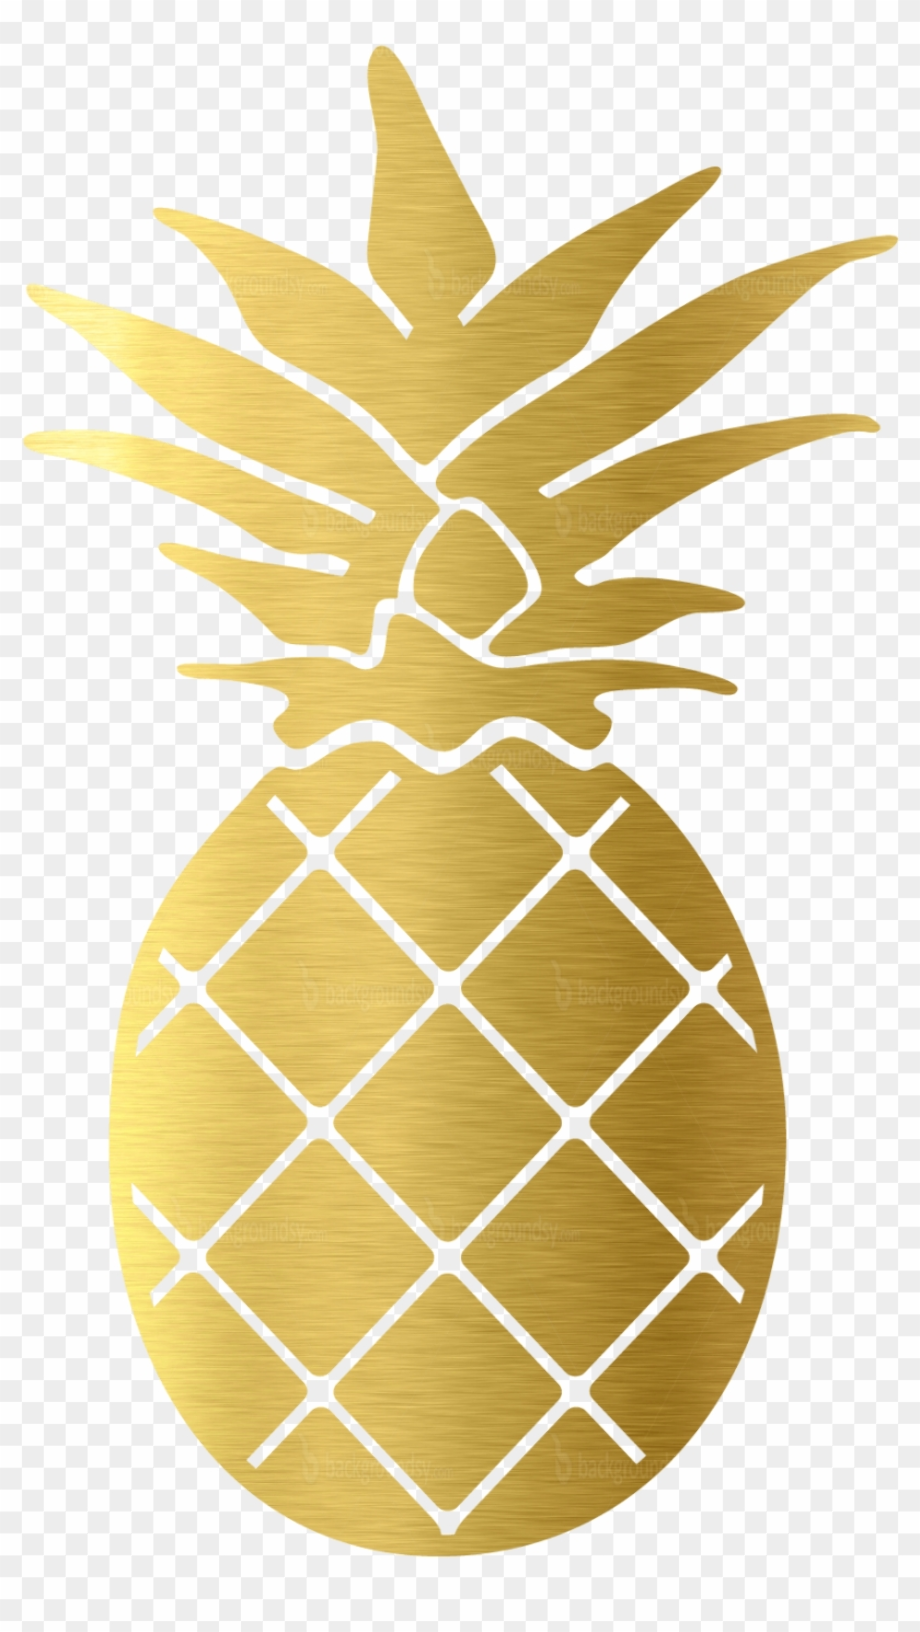 Download High Quality pineapple clip art gold Transparent PNG Images